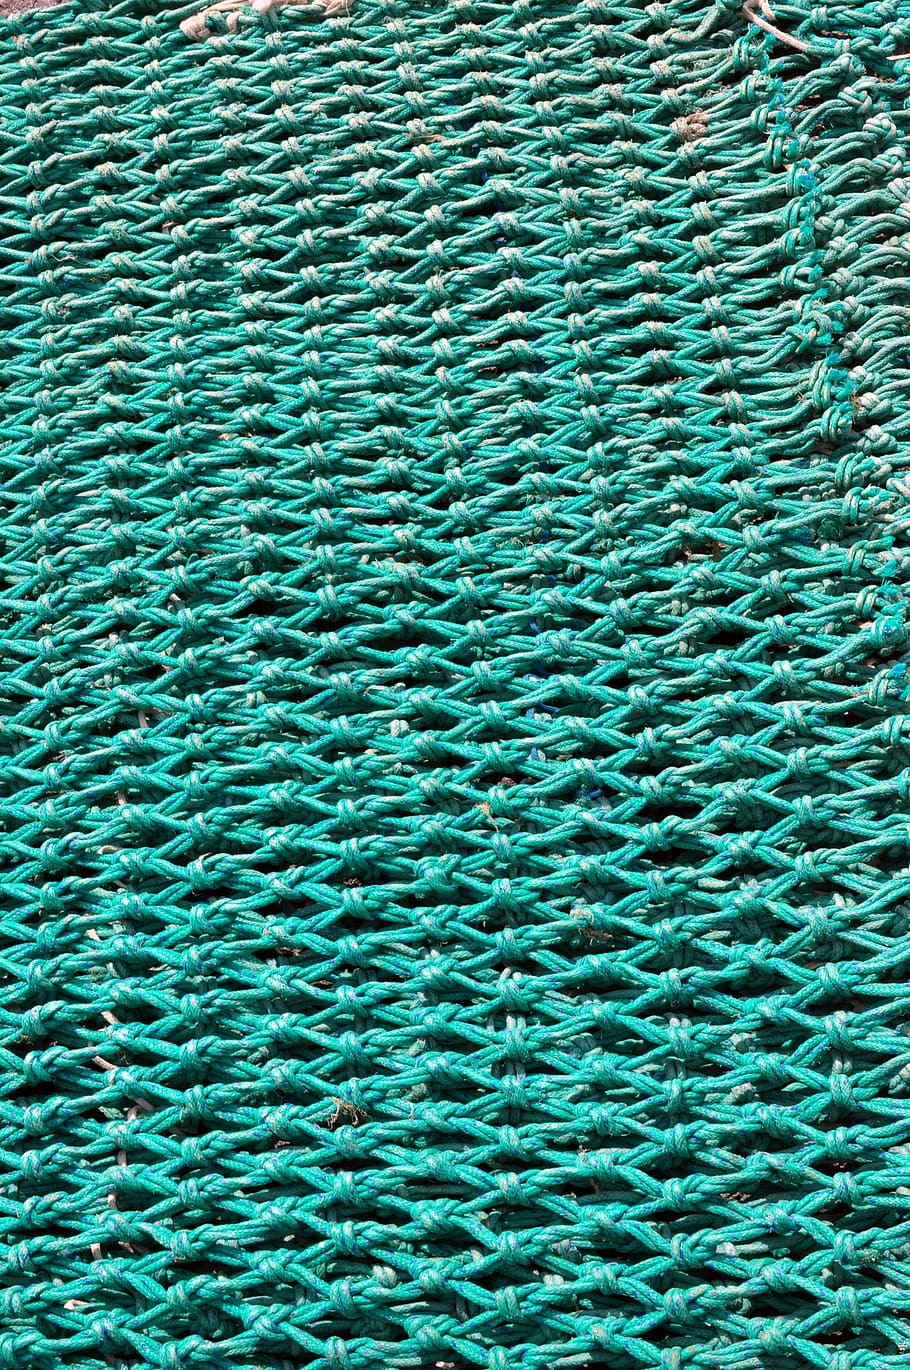 fishing net, mesh, node, backgrounds, full frame, pattern, textured, green color, textile, close-up